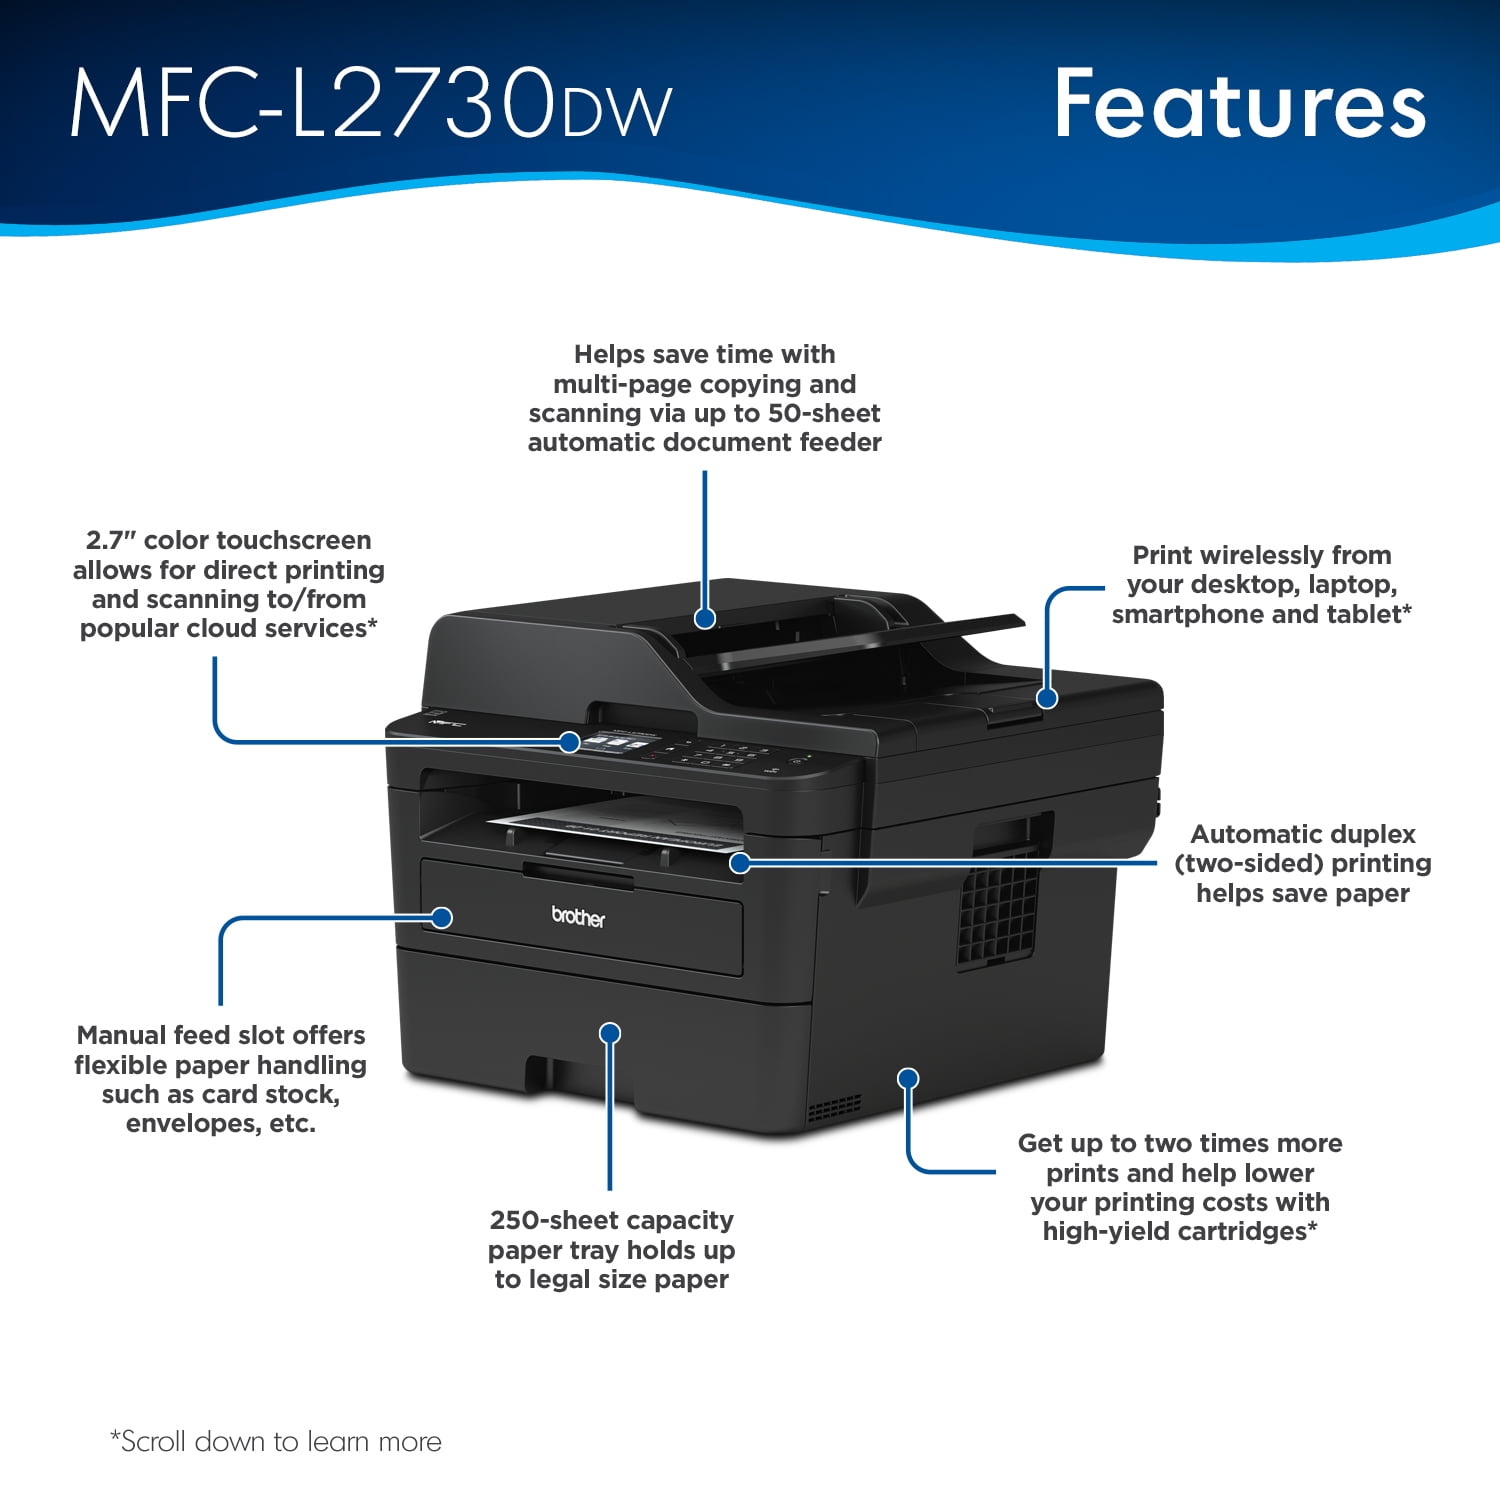 Brother MFC-L2730DW Printer Review - Consumer Reports